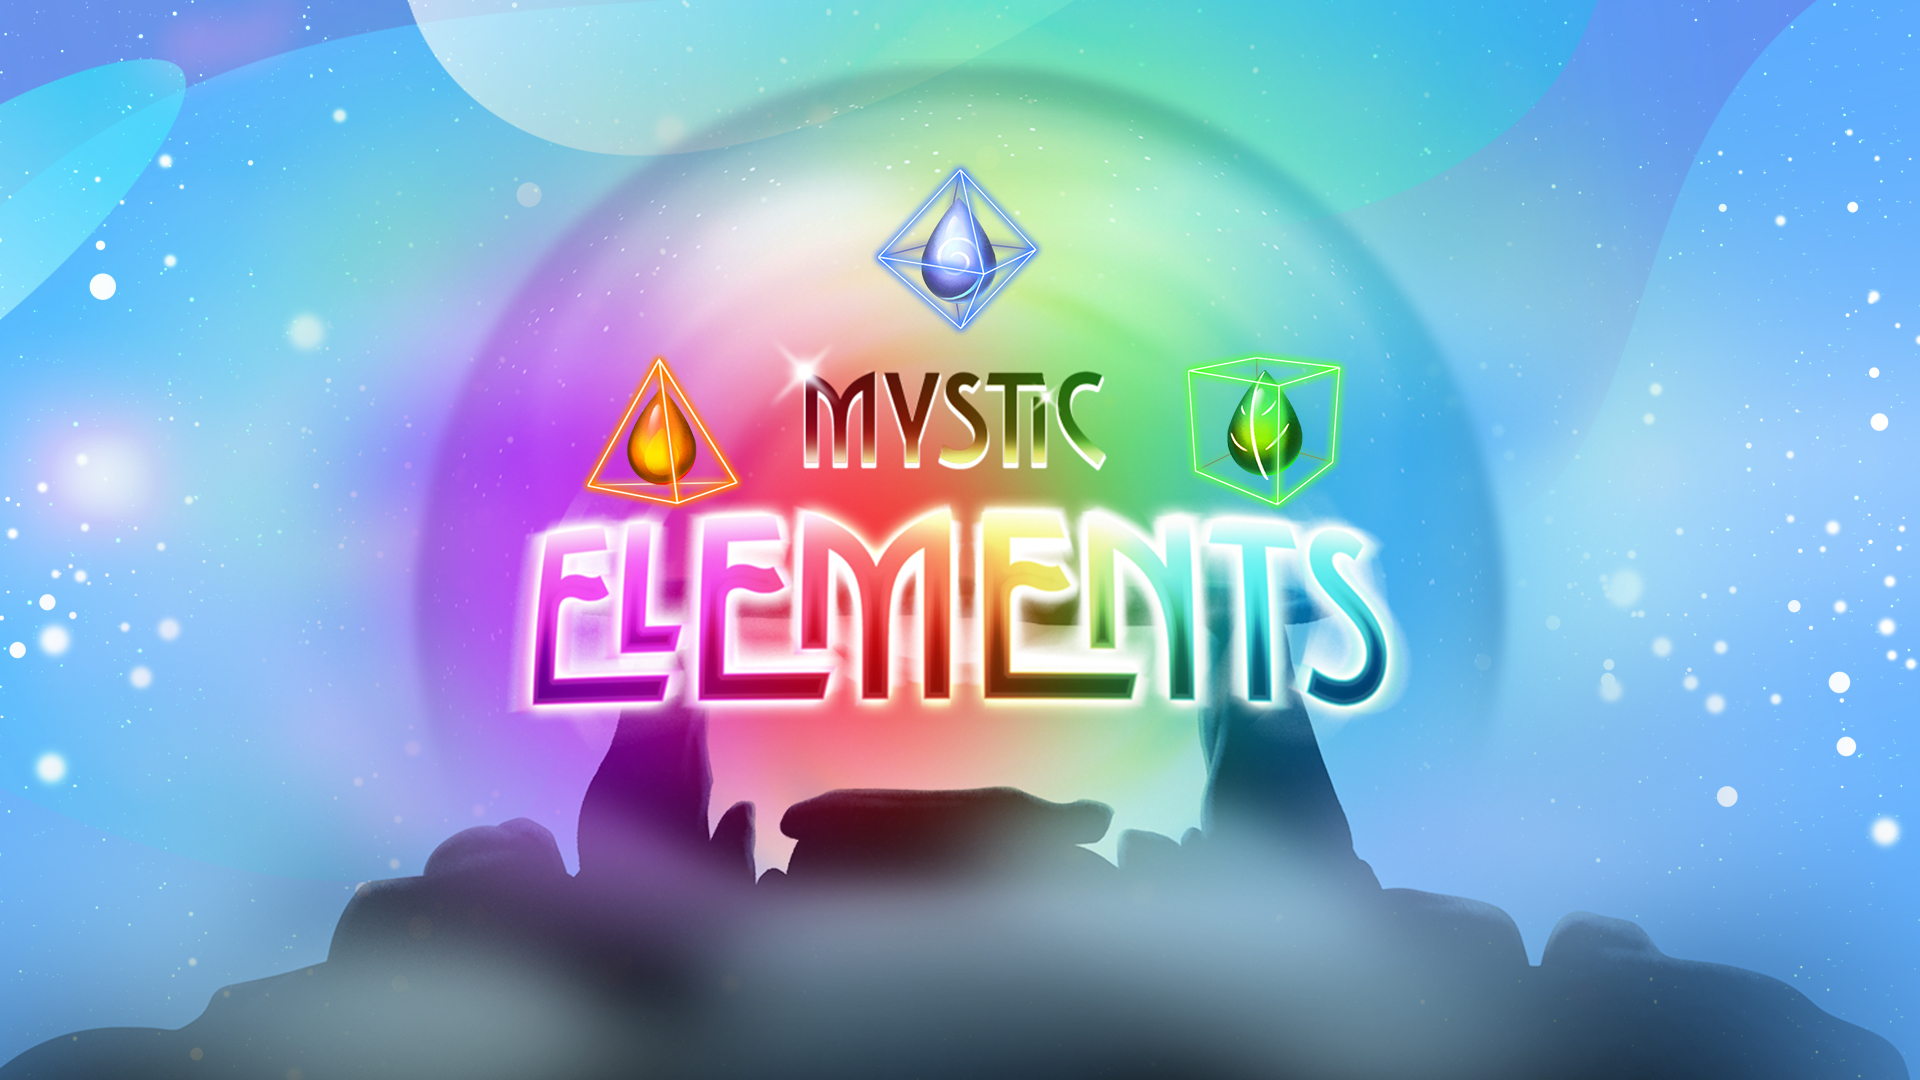 The SlotsLV slots game logo for the game Mystic Elements.